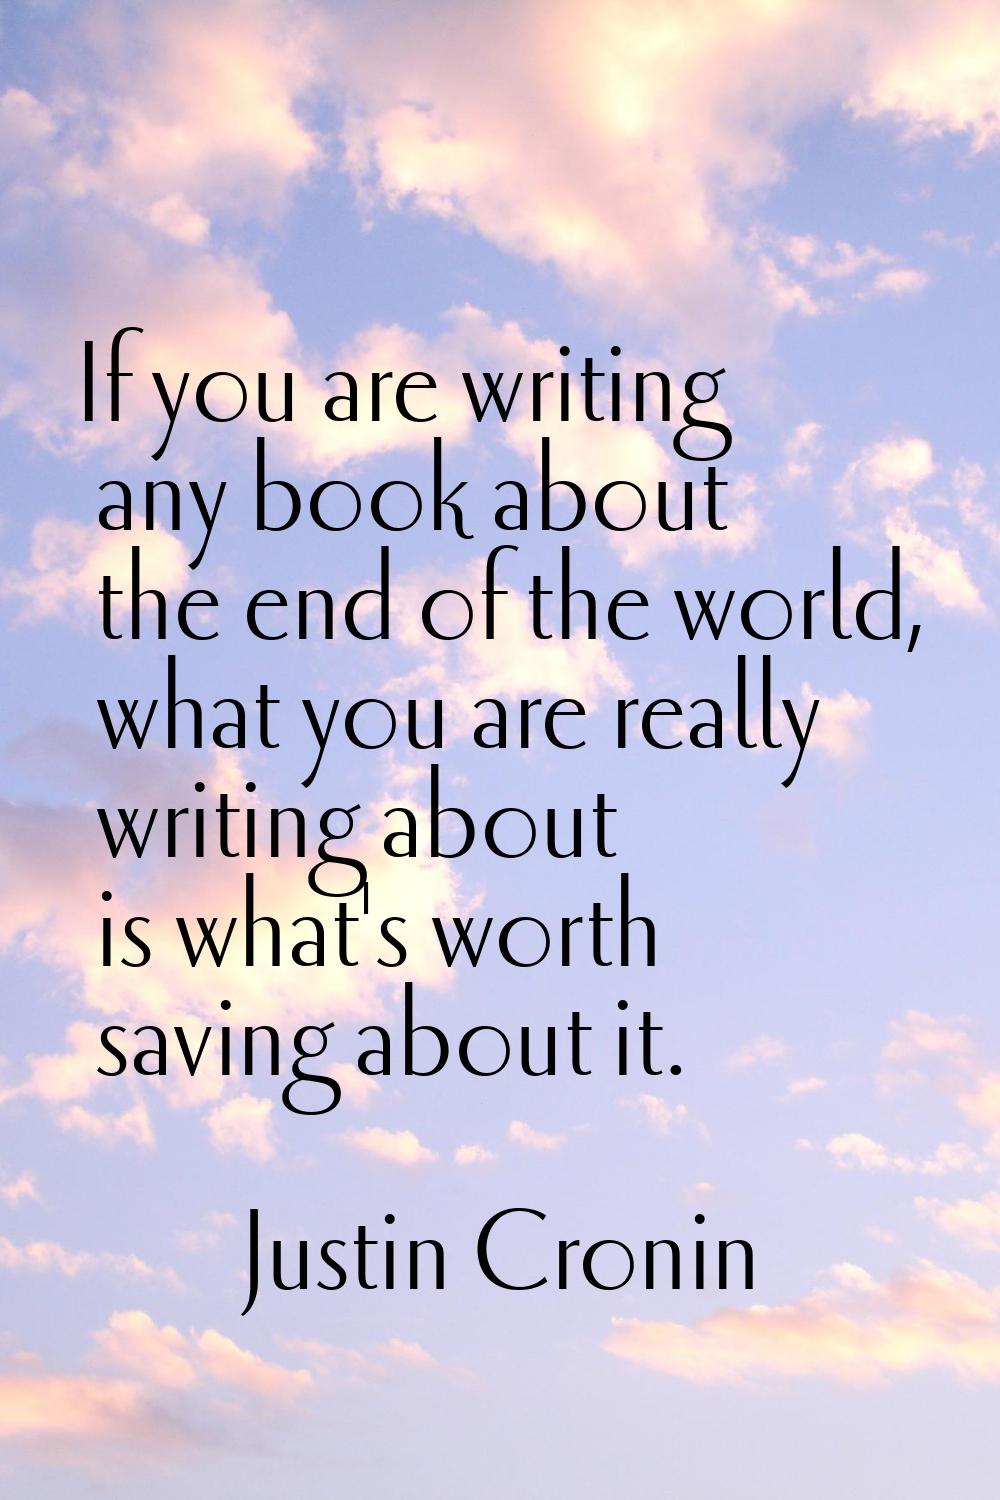 If you are writing any book about the end of the world, what you are really writing about is what's